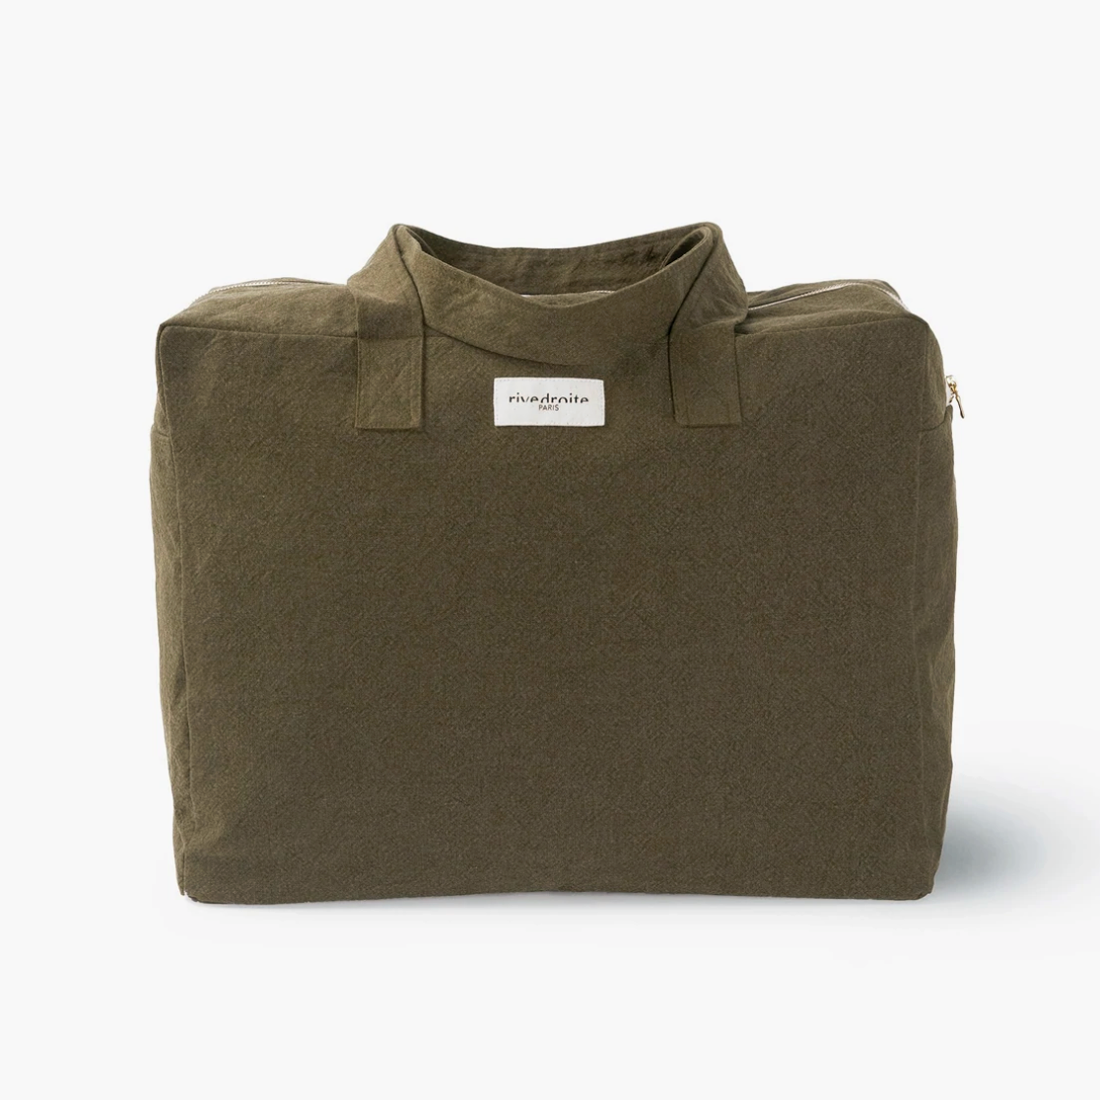 Elzevir Olive Green Recycled Cotton Weekend Bag